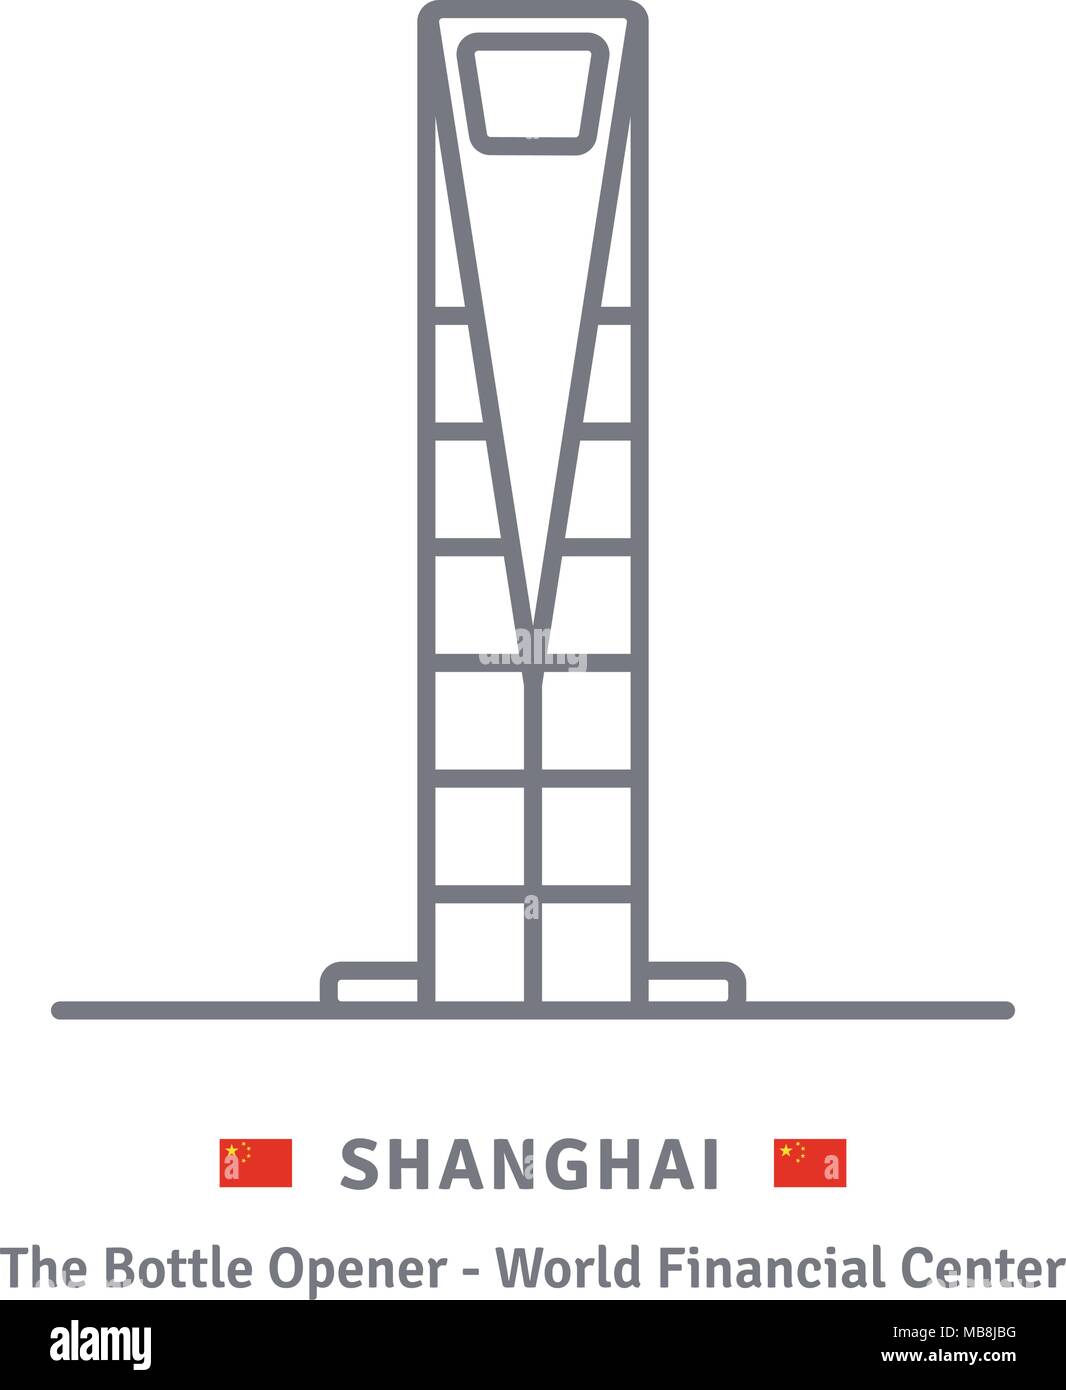 Shanghai line icon. The Bottle Opener skyscraper and Chinese flag vector illustration. Stock Vector